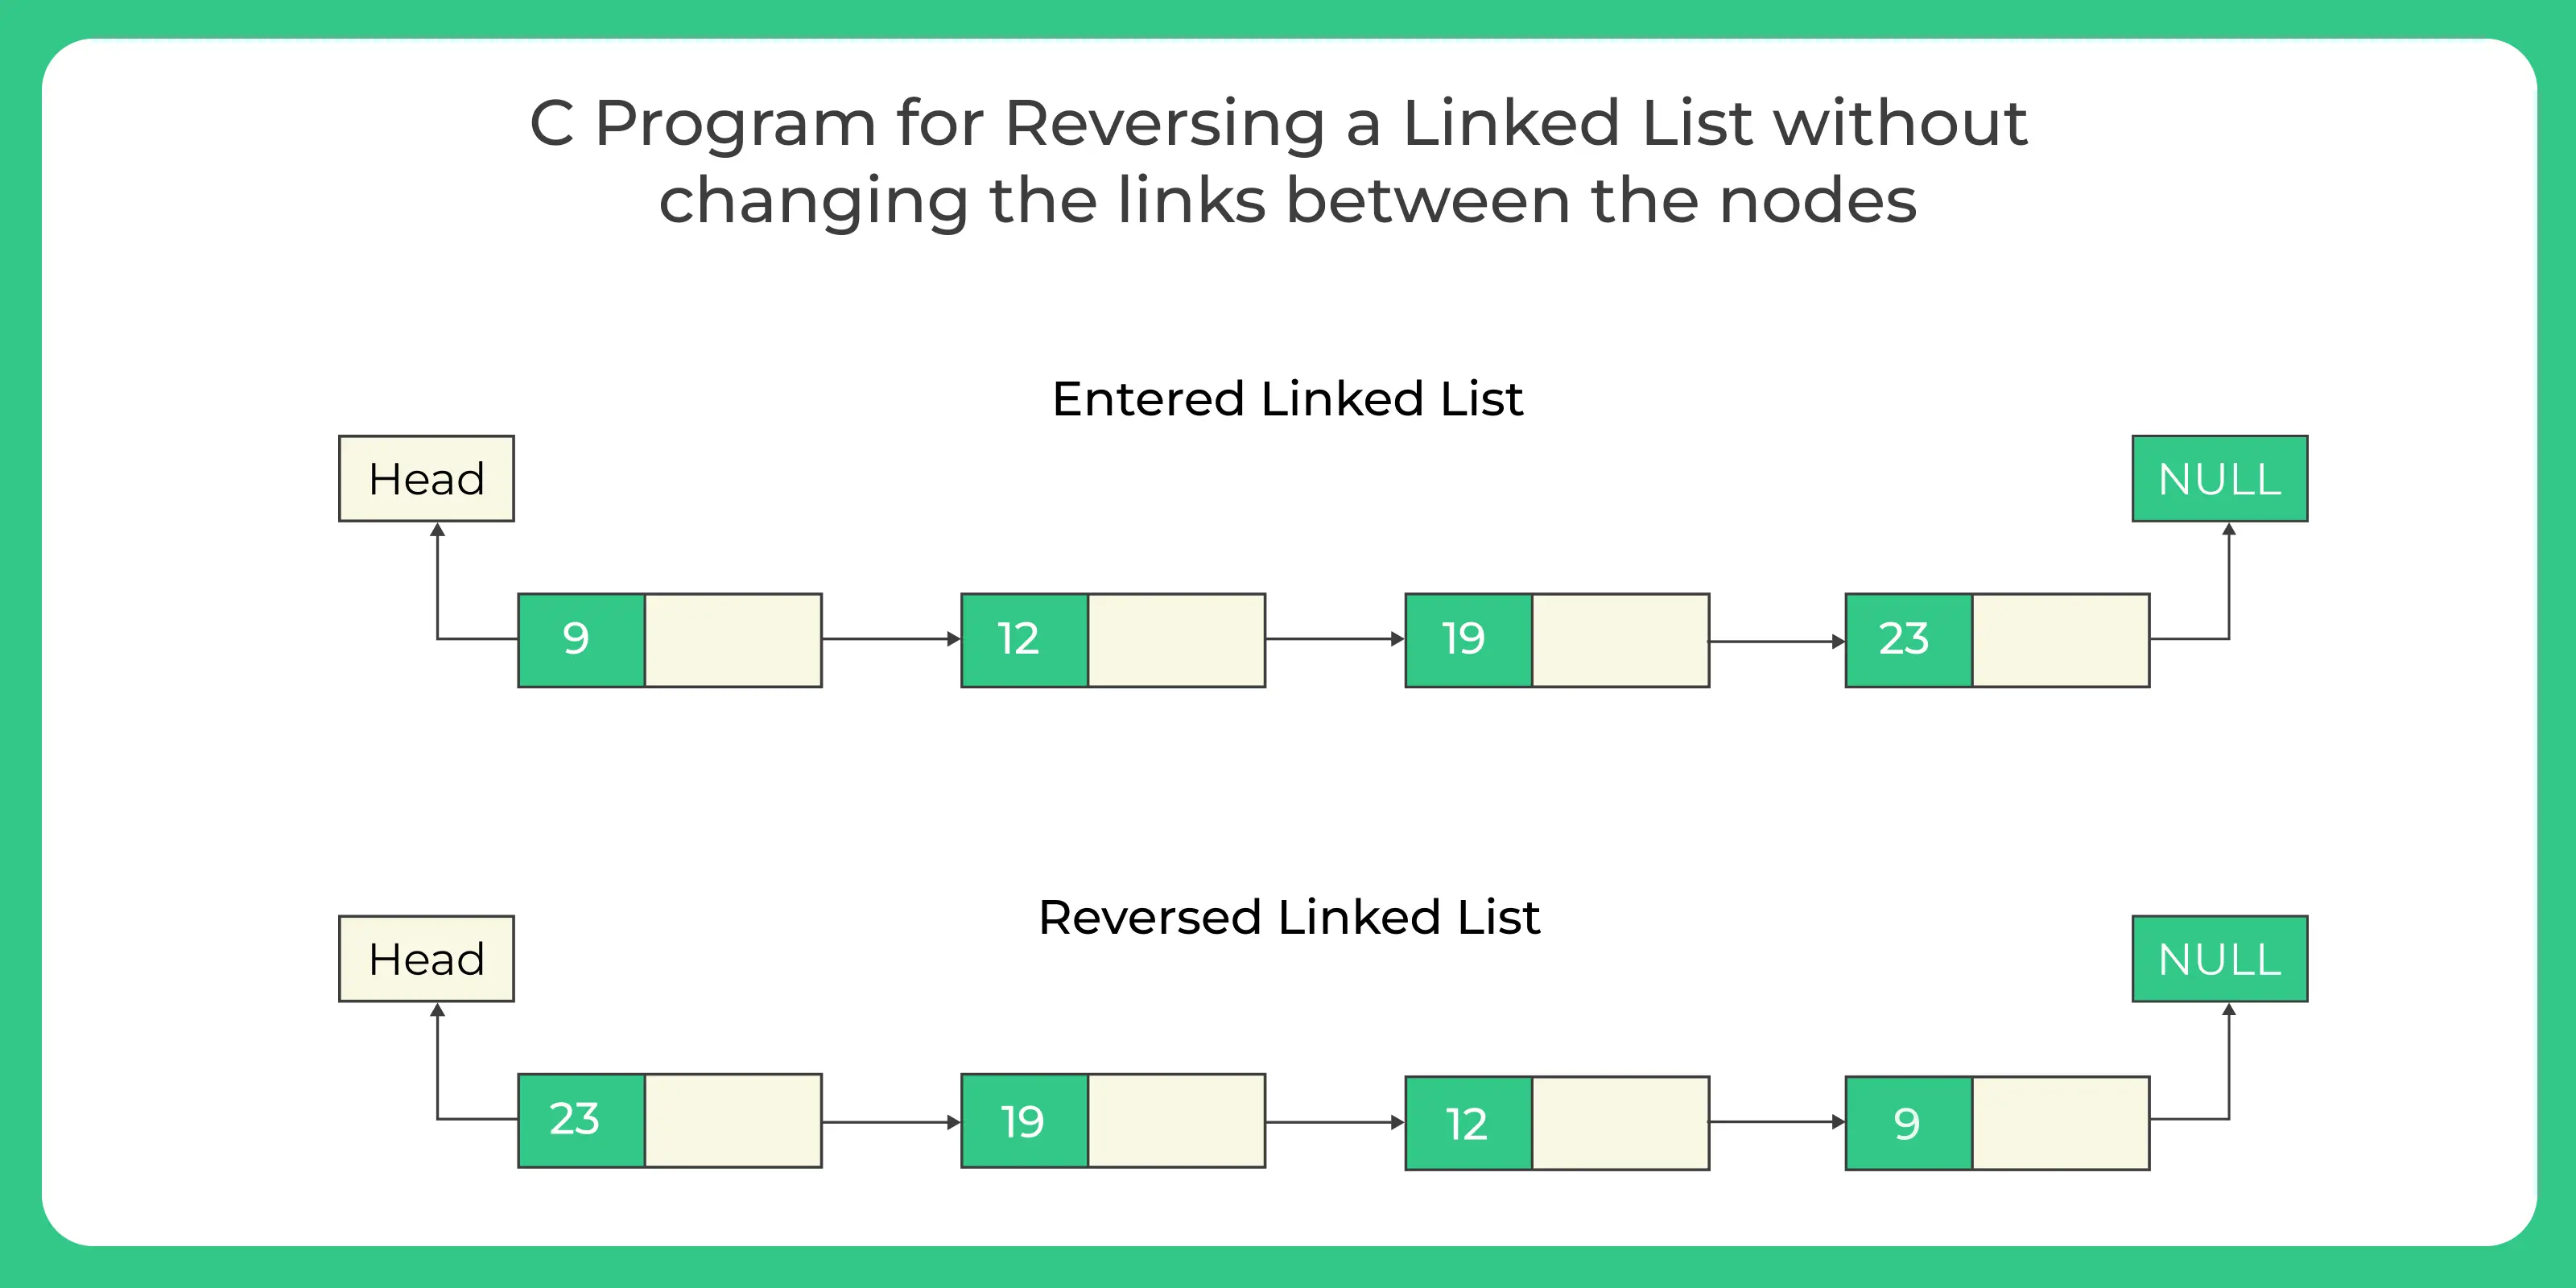 C Program for Reversing a Linked List without changing the links between the nodes